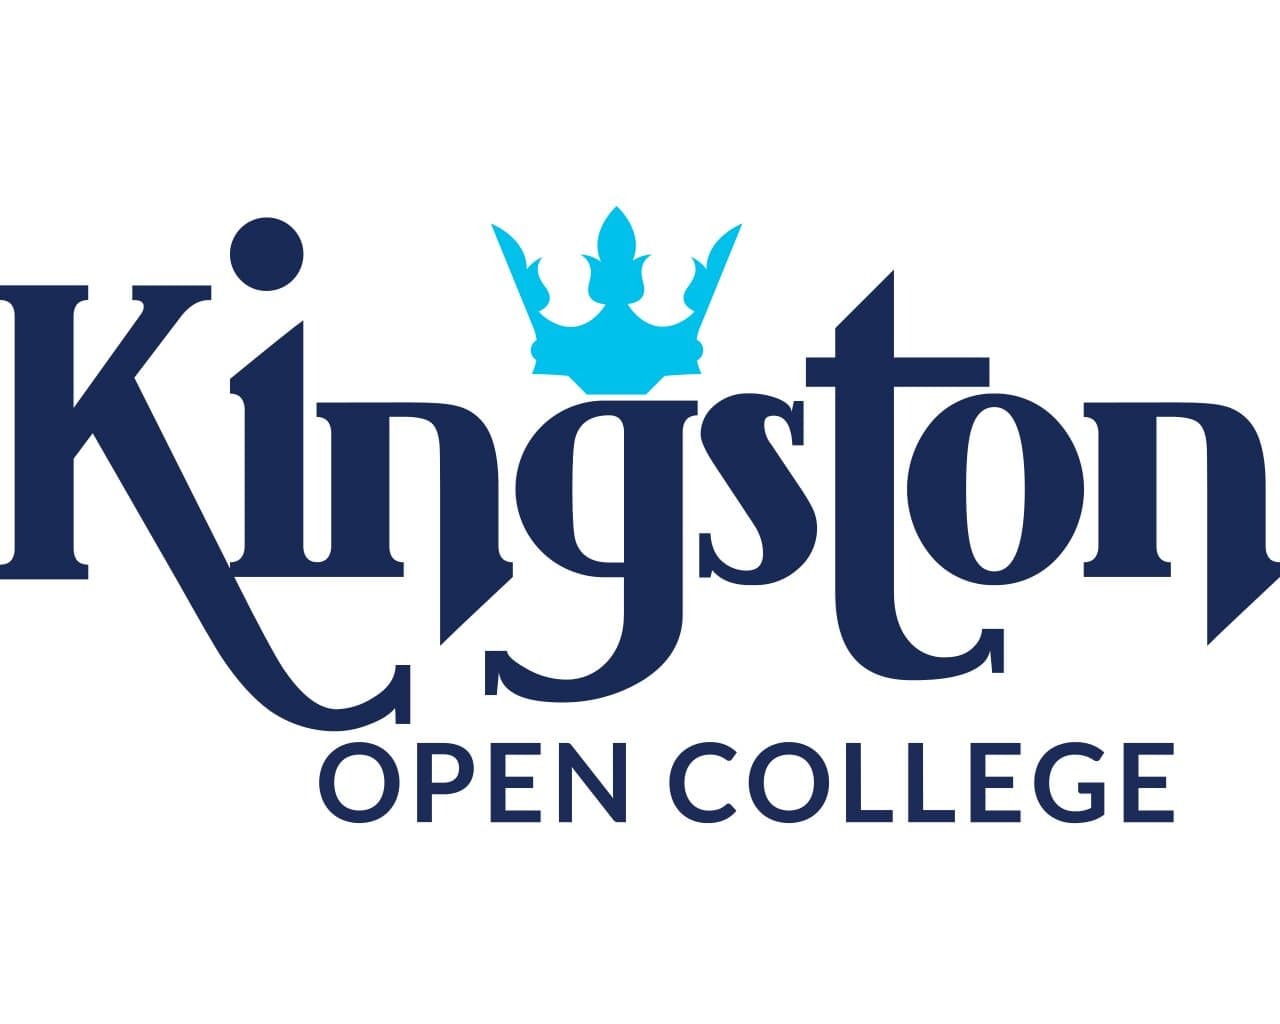 More about Kingston Open College